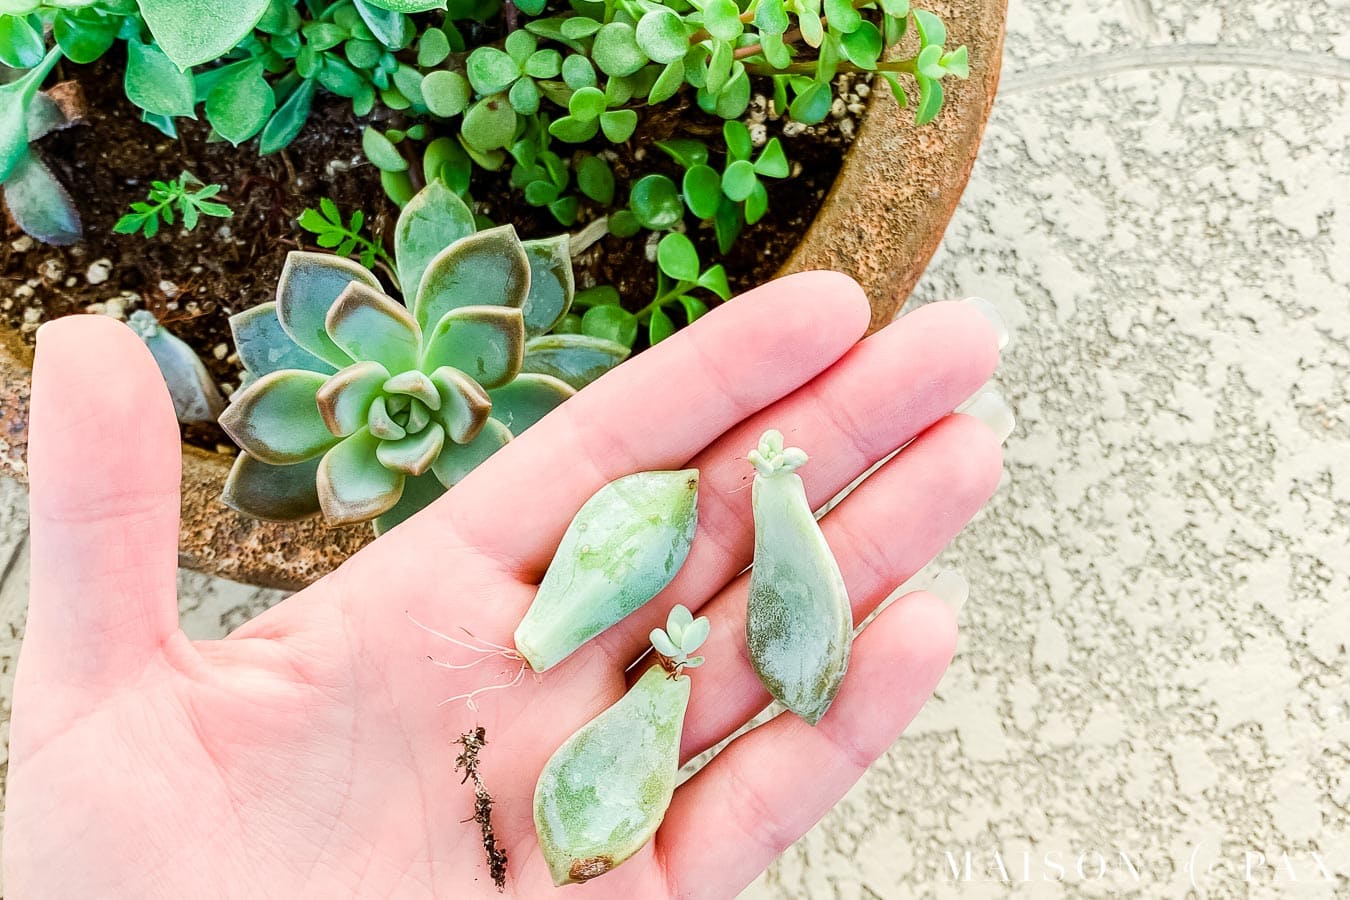 how to propagate succulents from clippings | Maison de Pax